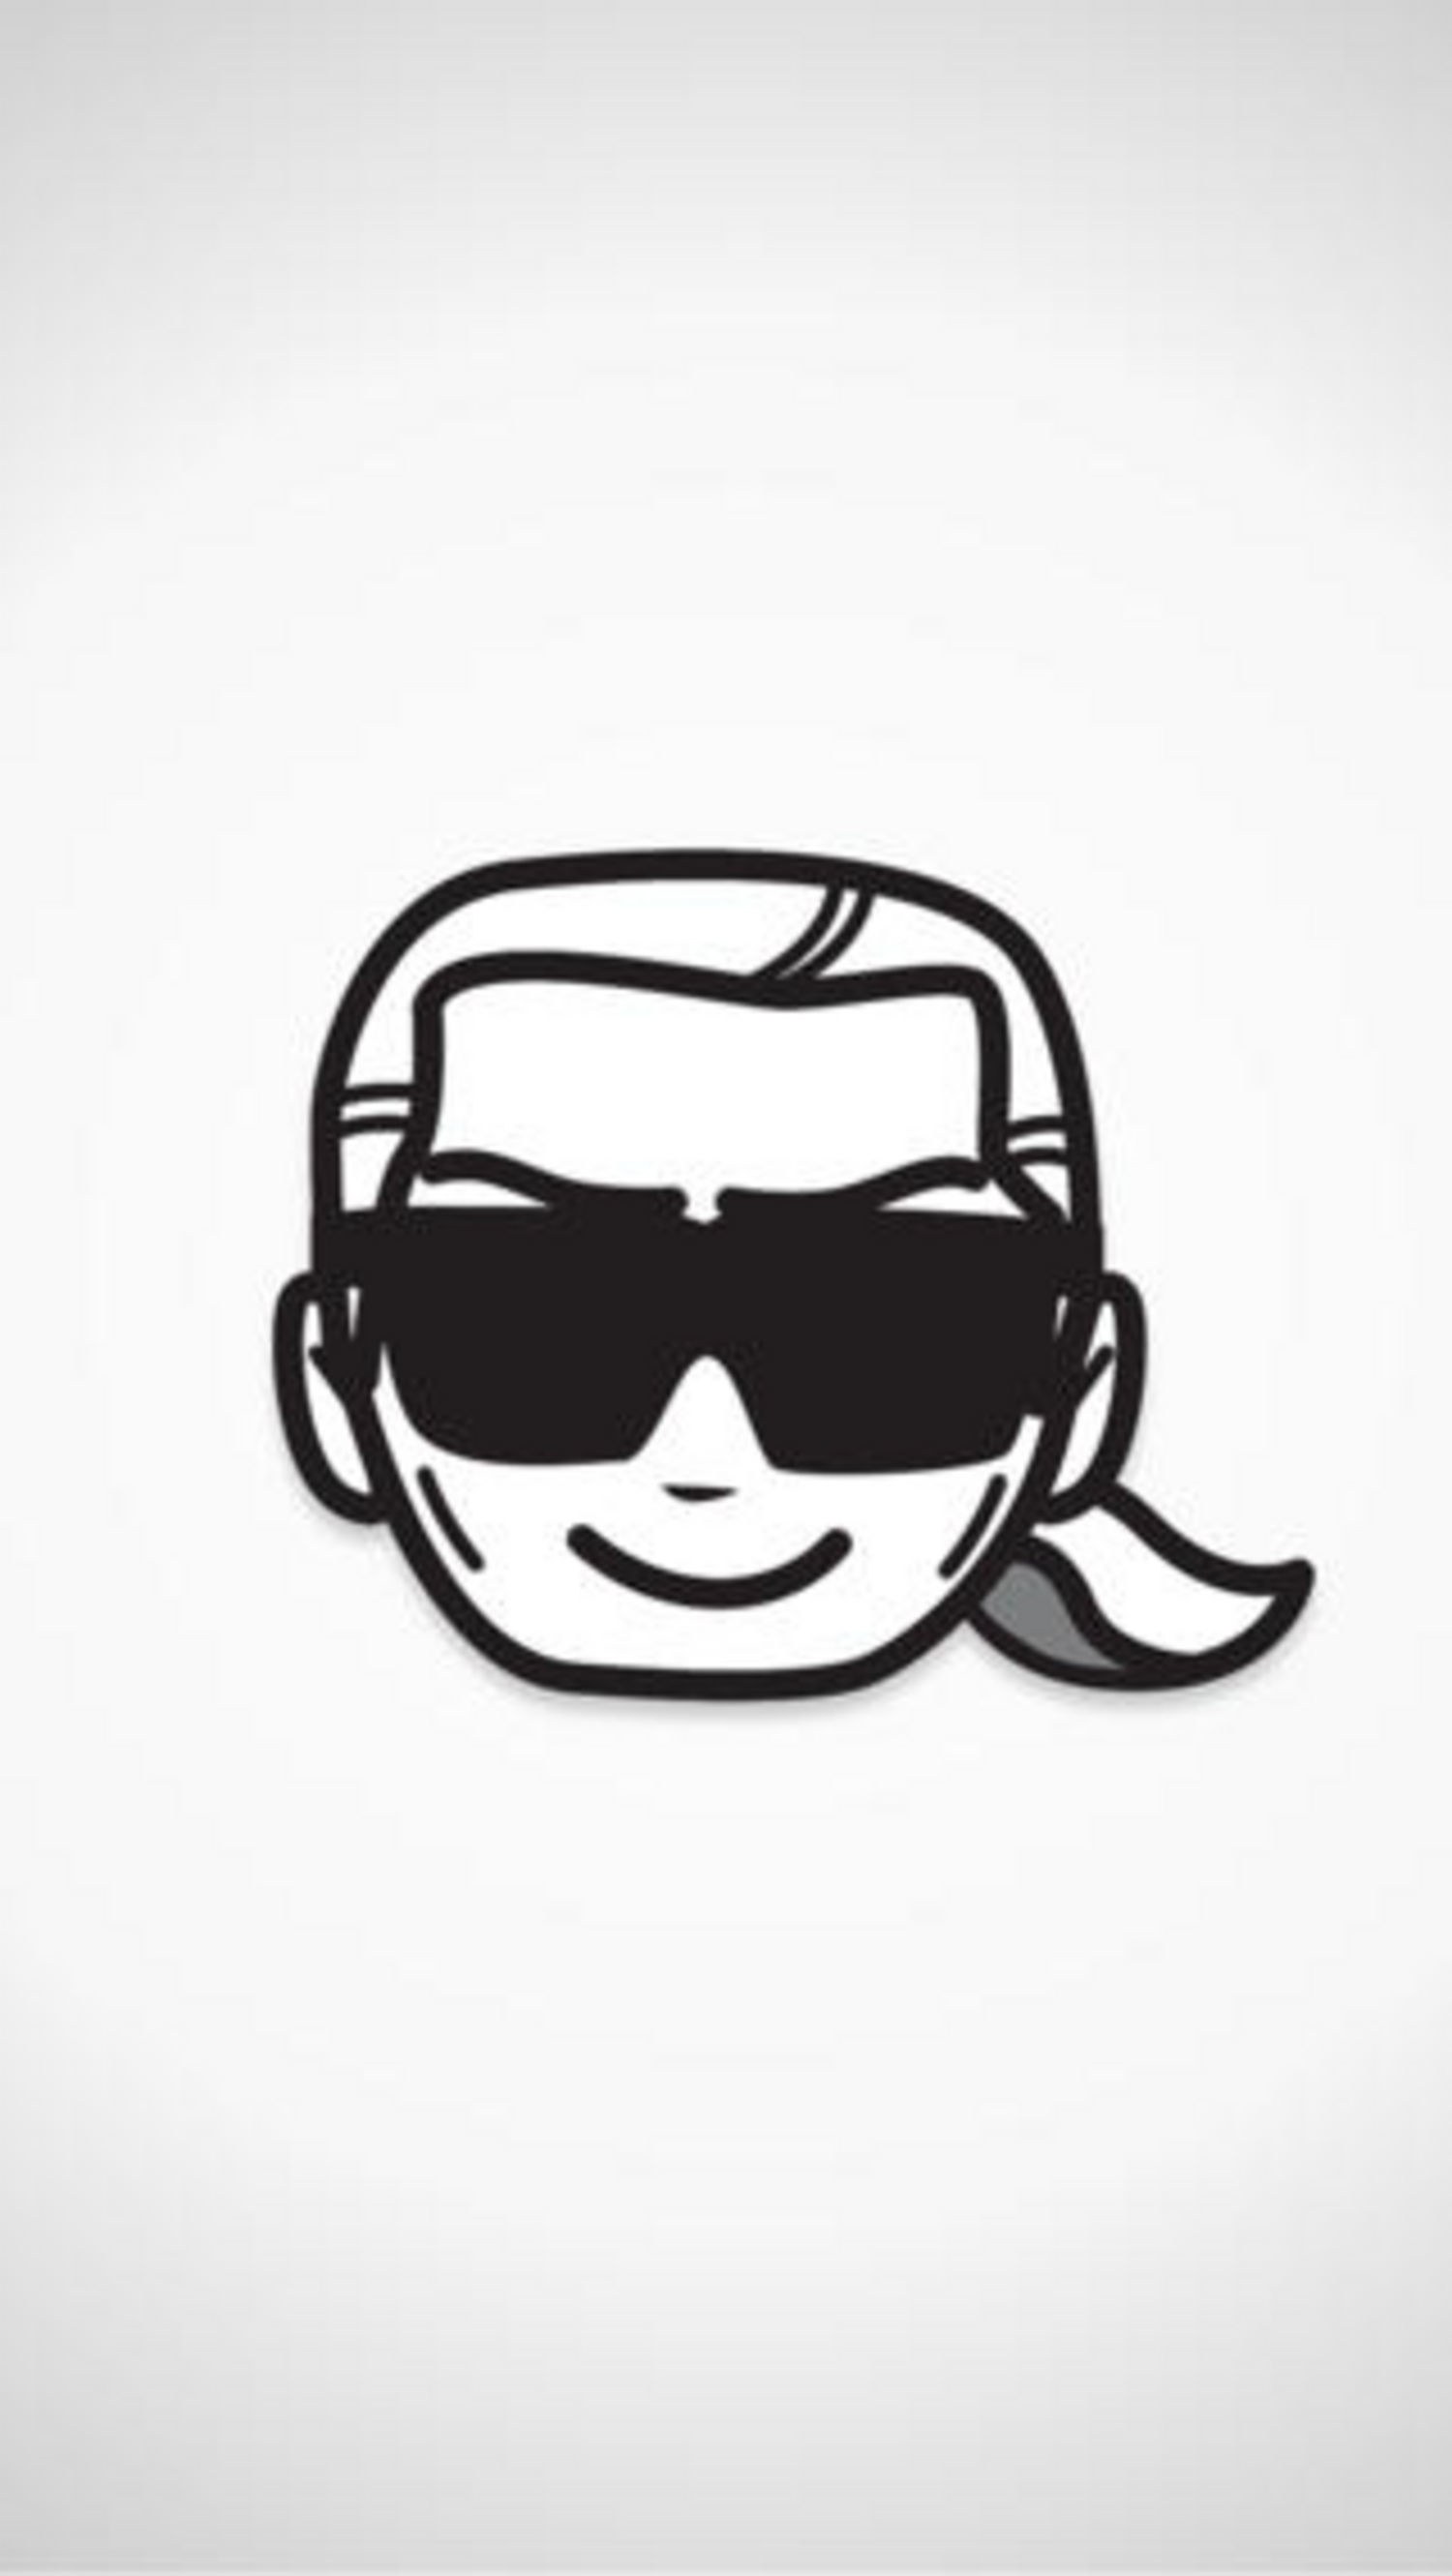 karl lagerfeld logo clipart 10 free Cliparts | Download images on